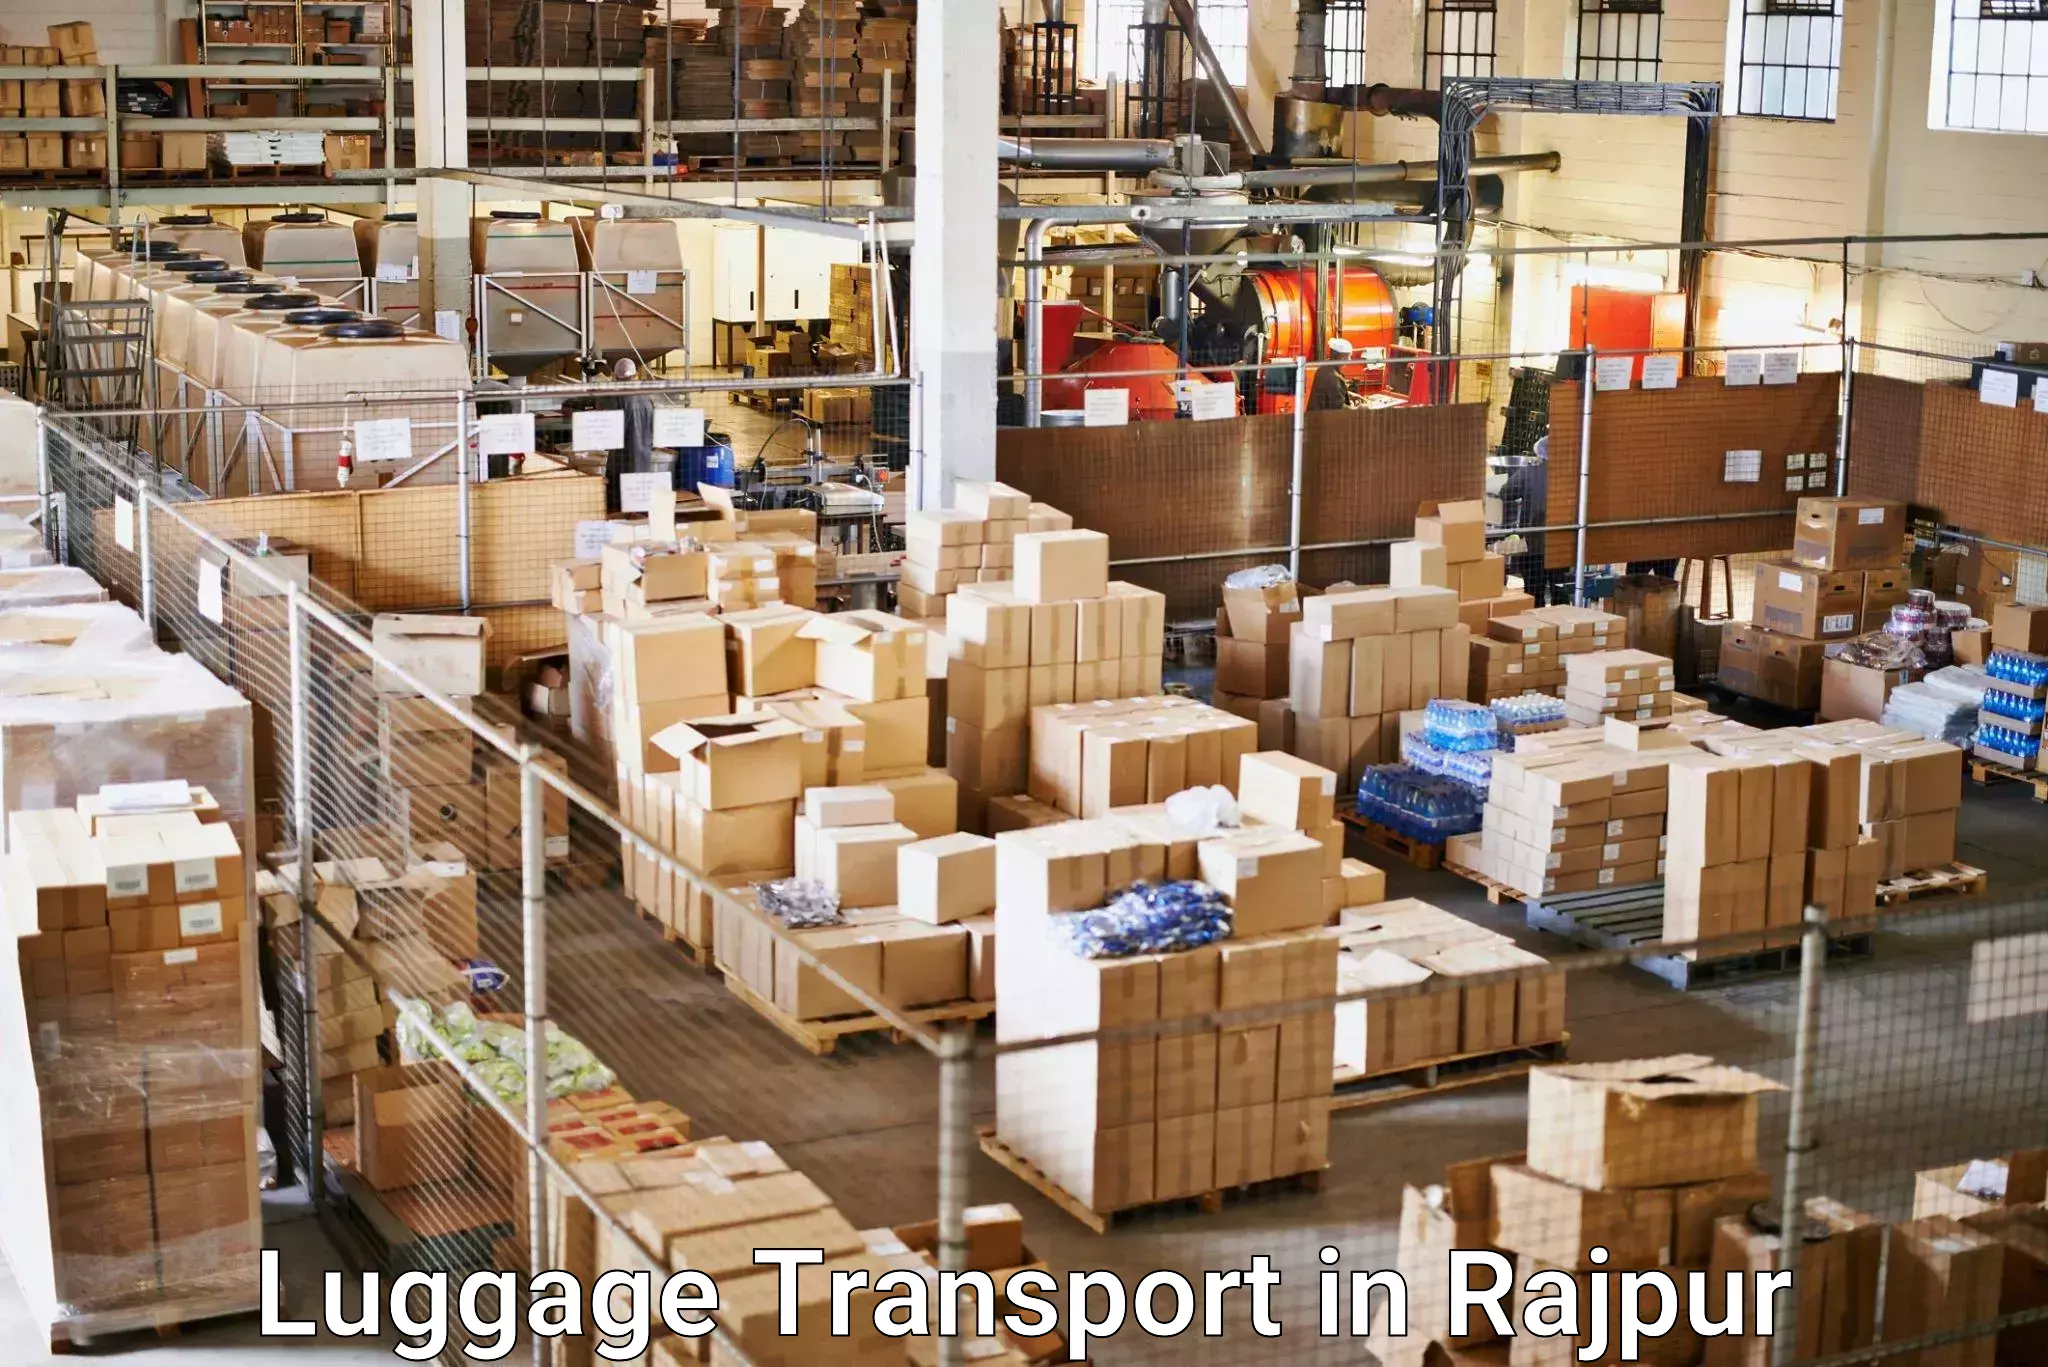 Business luggage transport in Rajpur